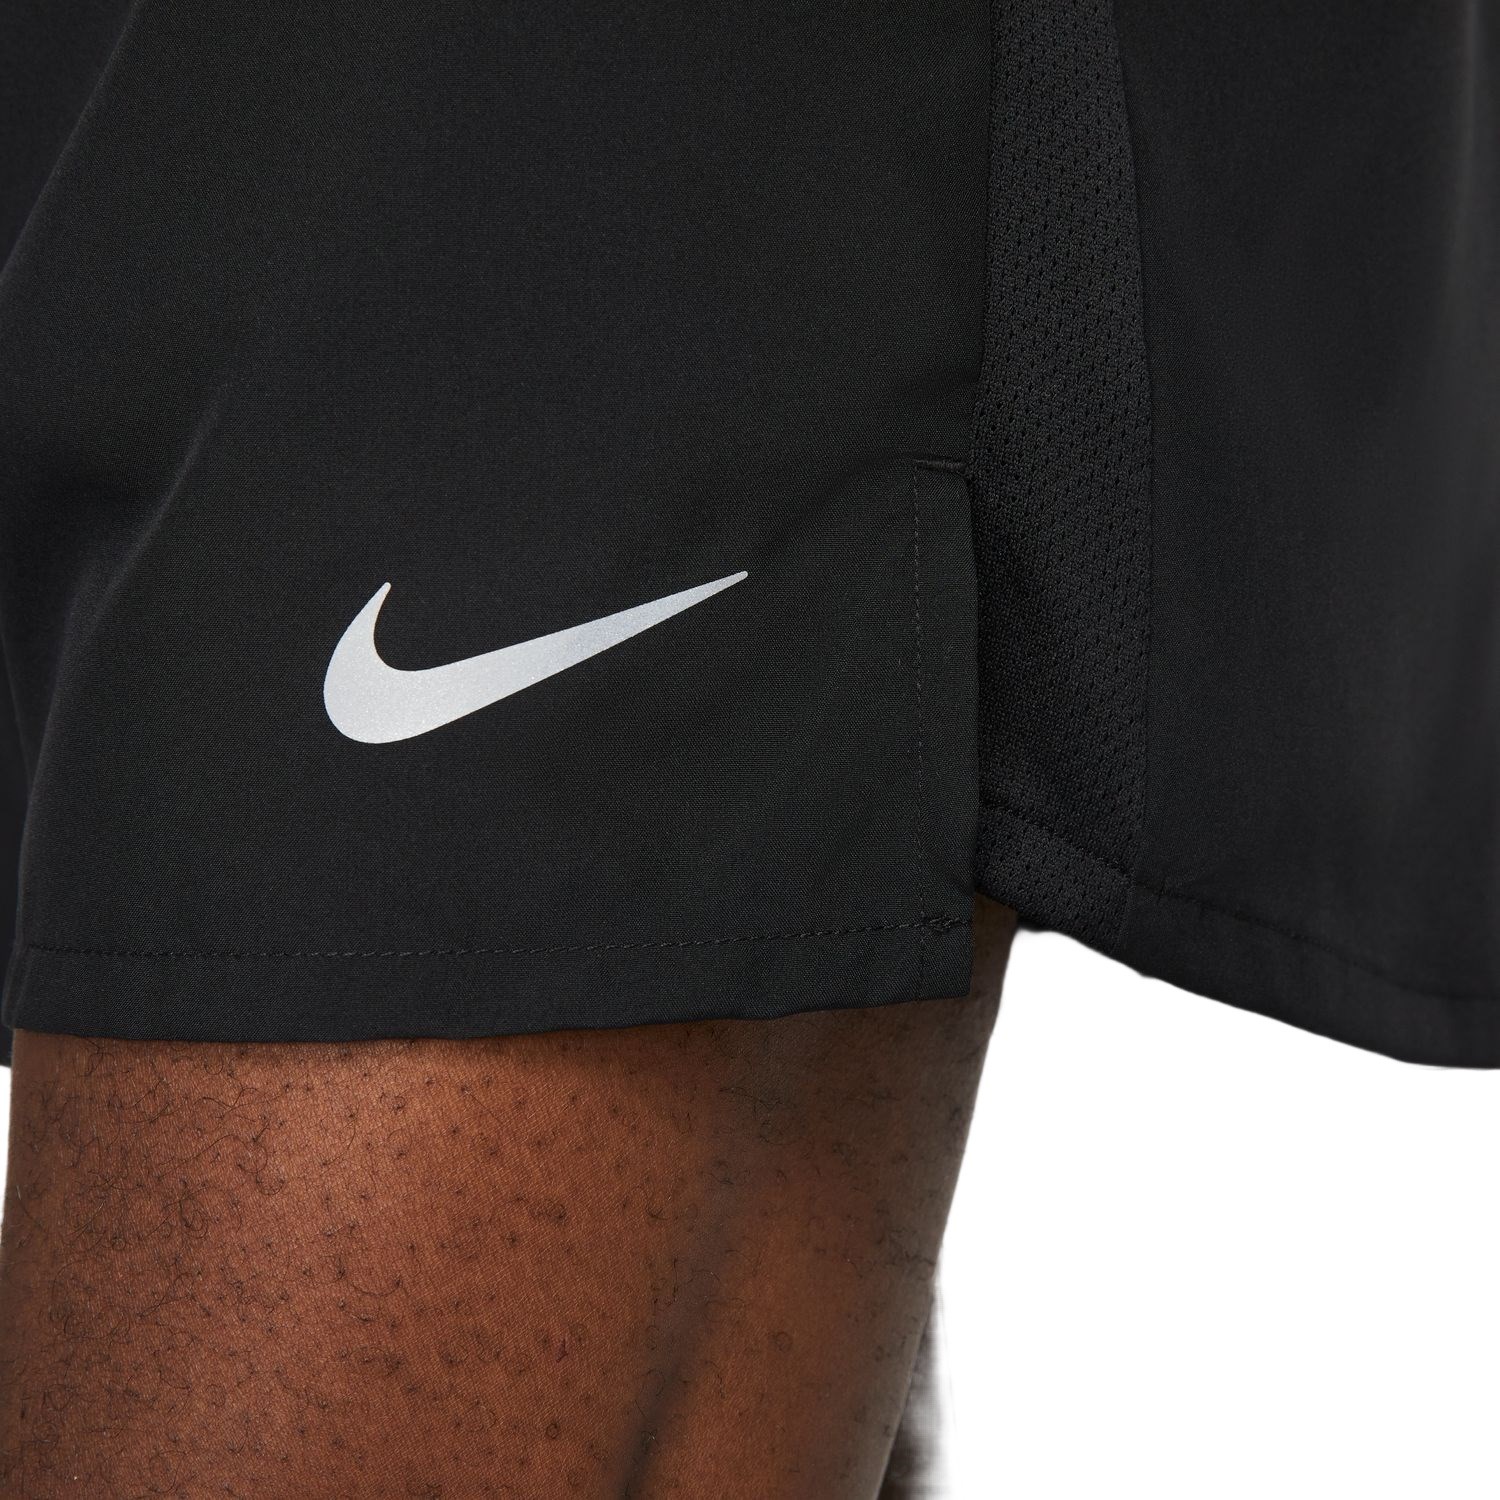 Nike Dri-Fit Challenger 5 Inch Brief-Lined Mens Running Shorts - Black ...